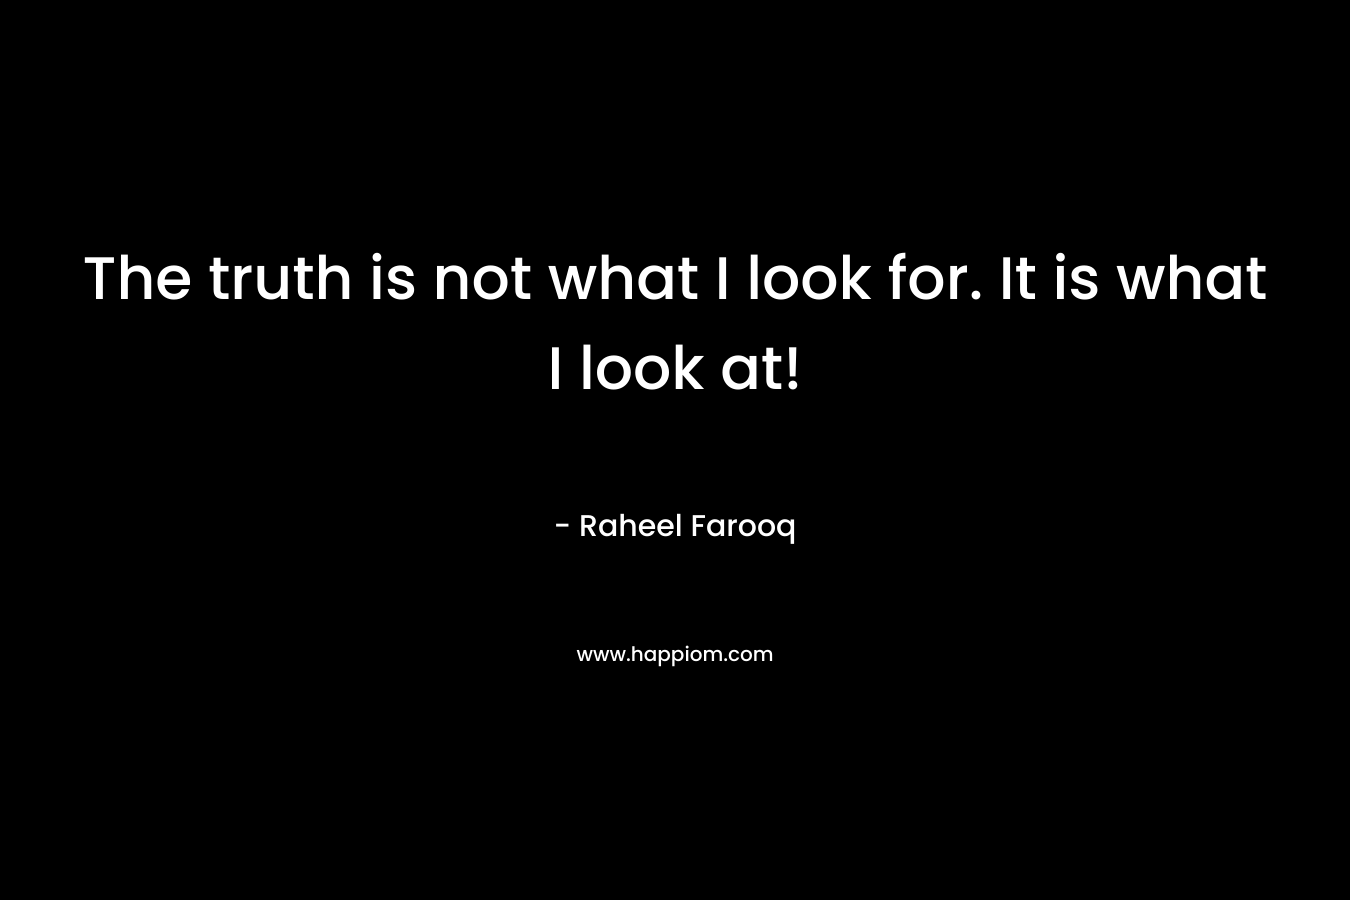 The truth is not what I look for. It is what I look at! – Raheel Farooq